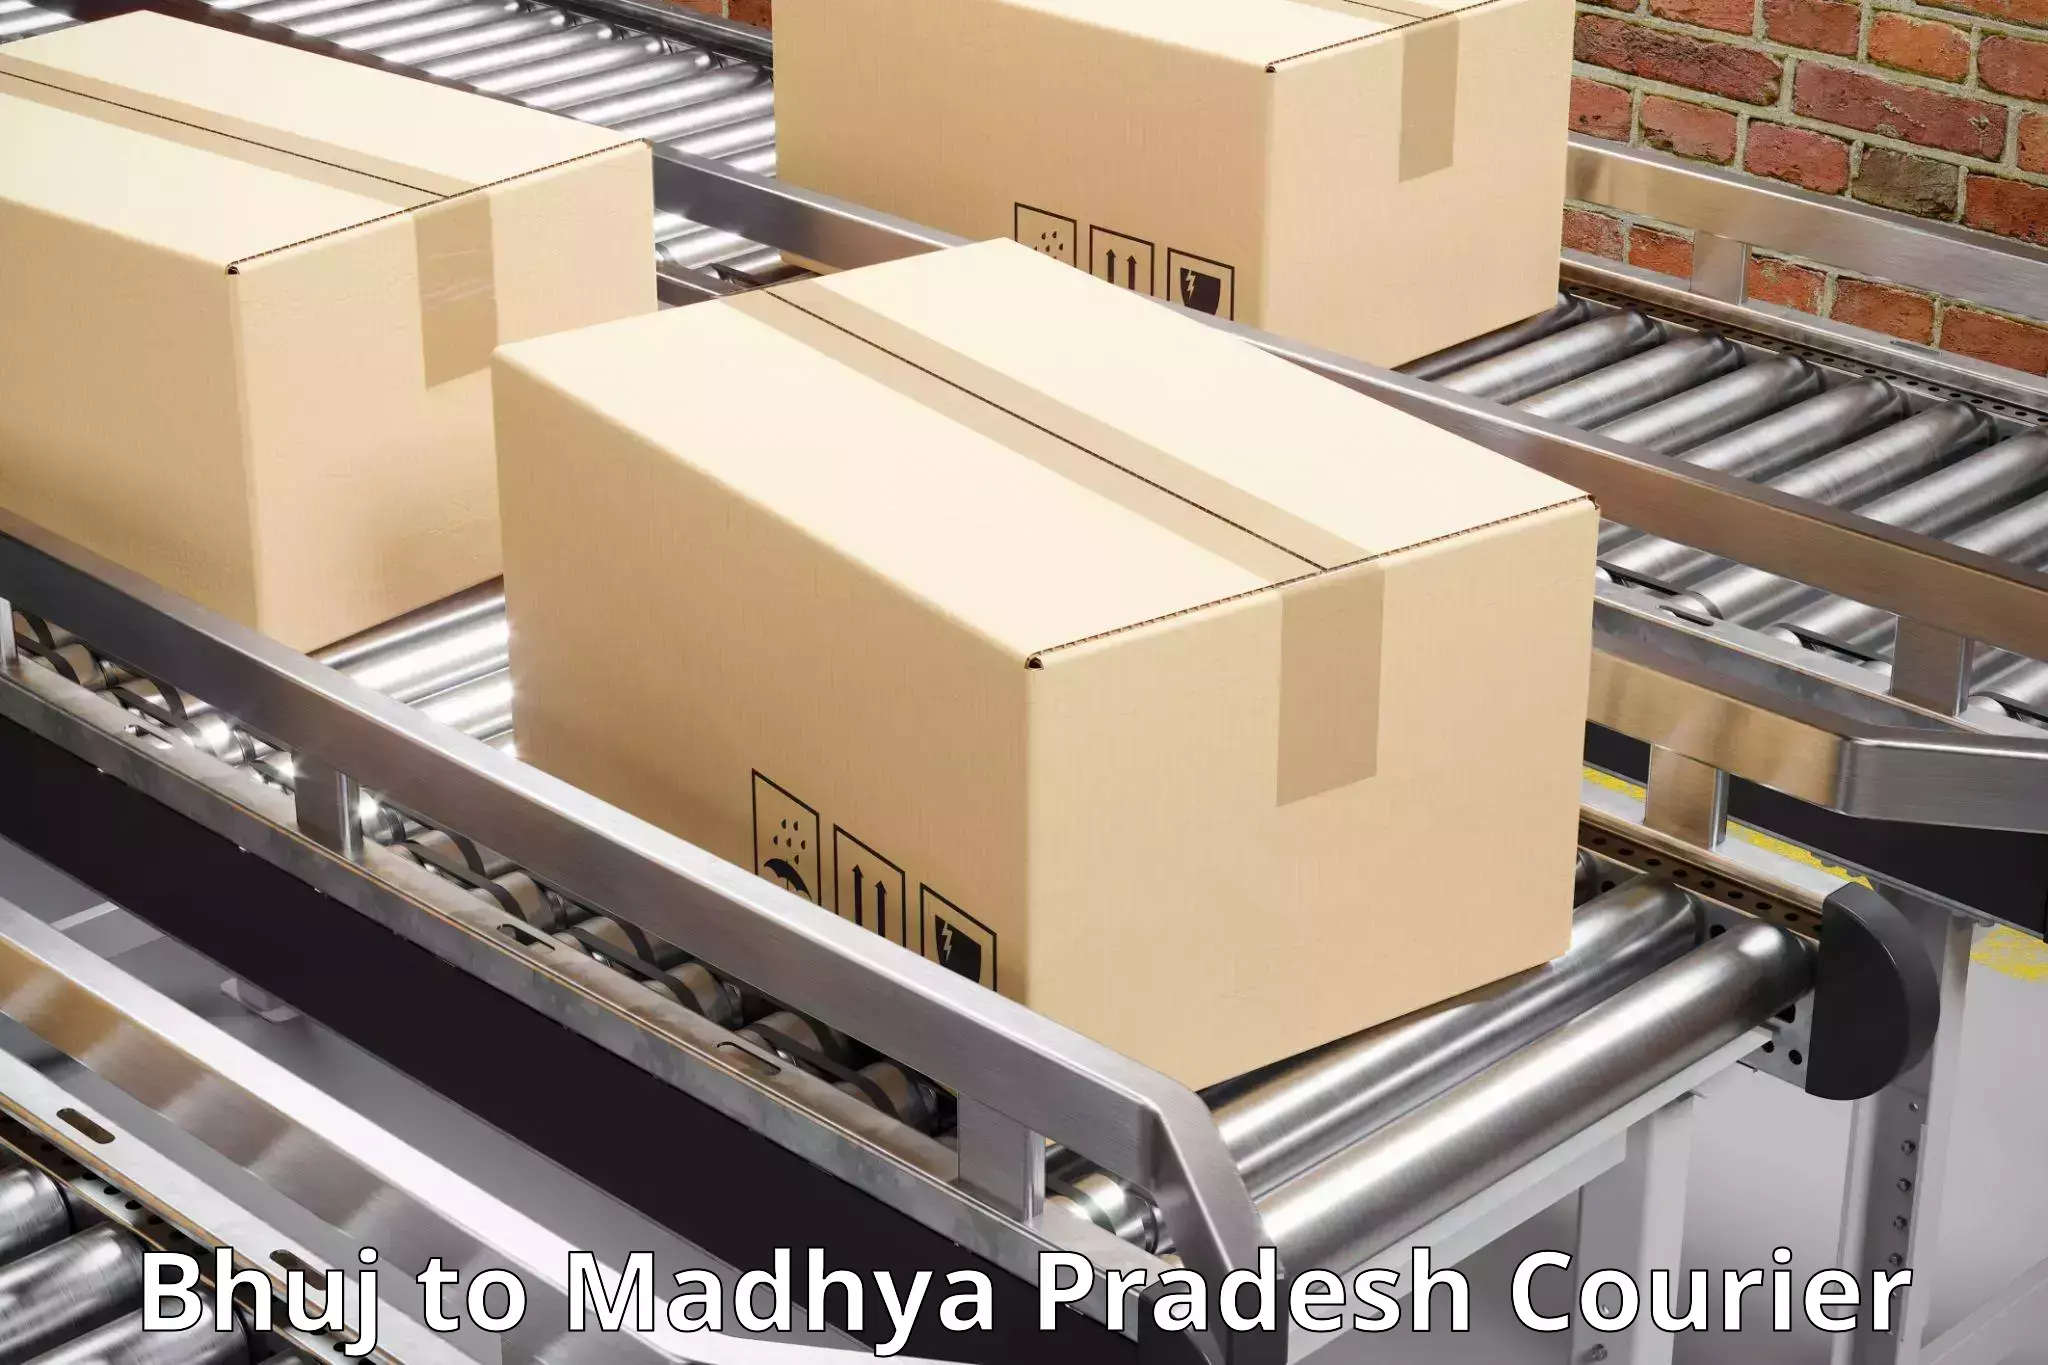 Express delivery capabilities Bhuj to Jawad Neemuch